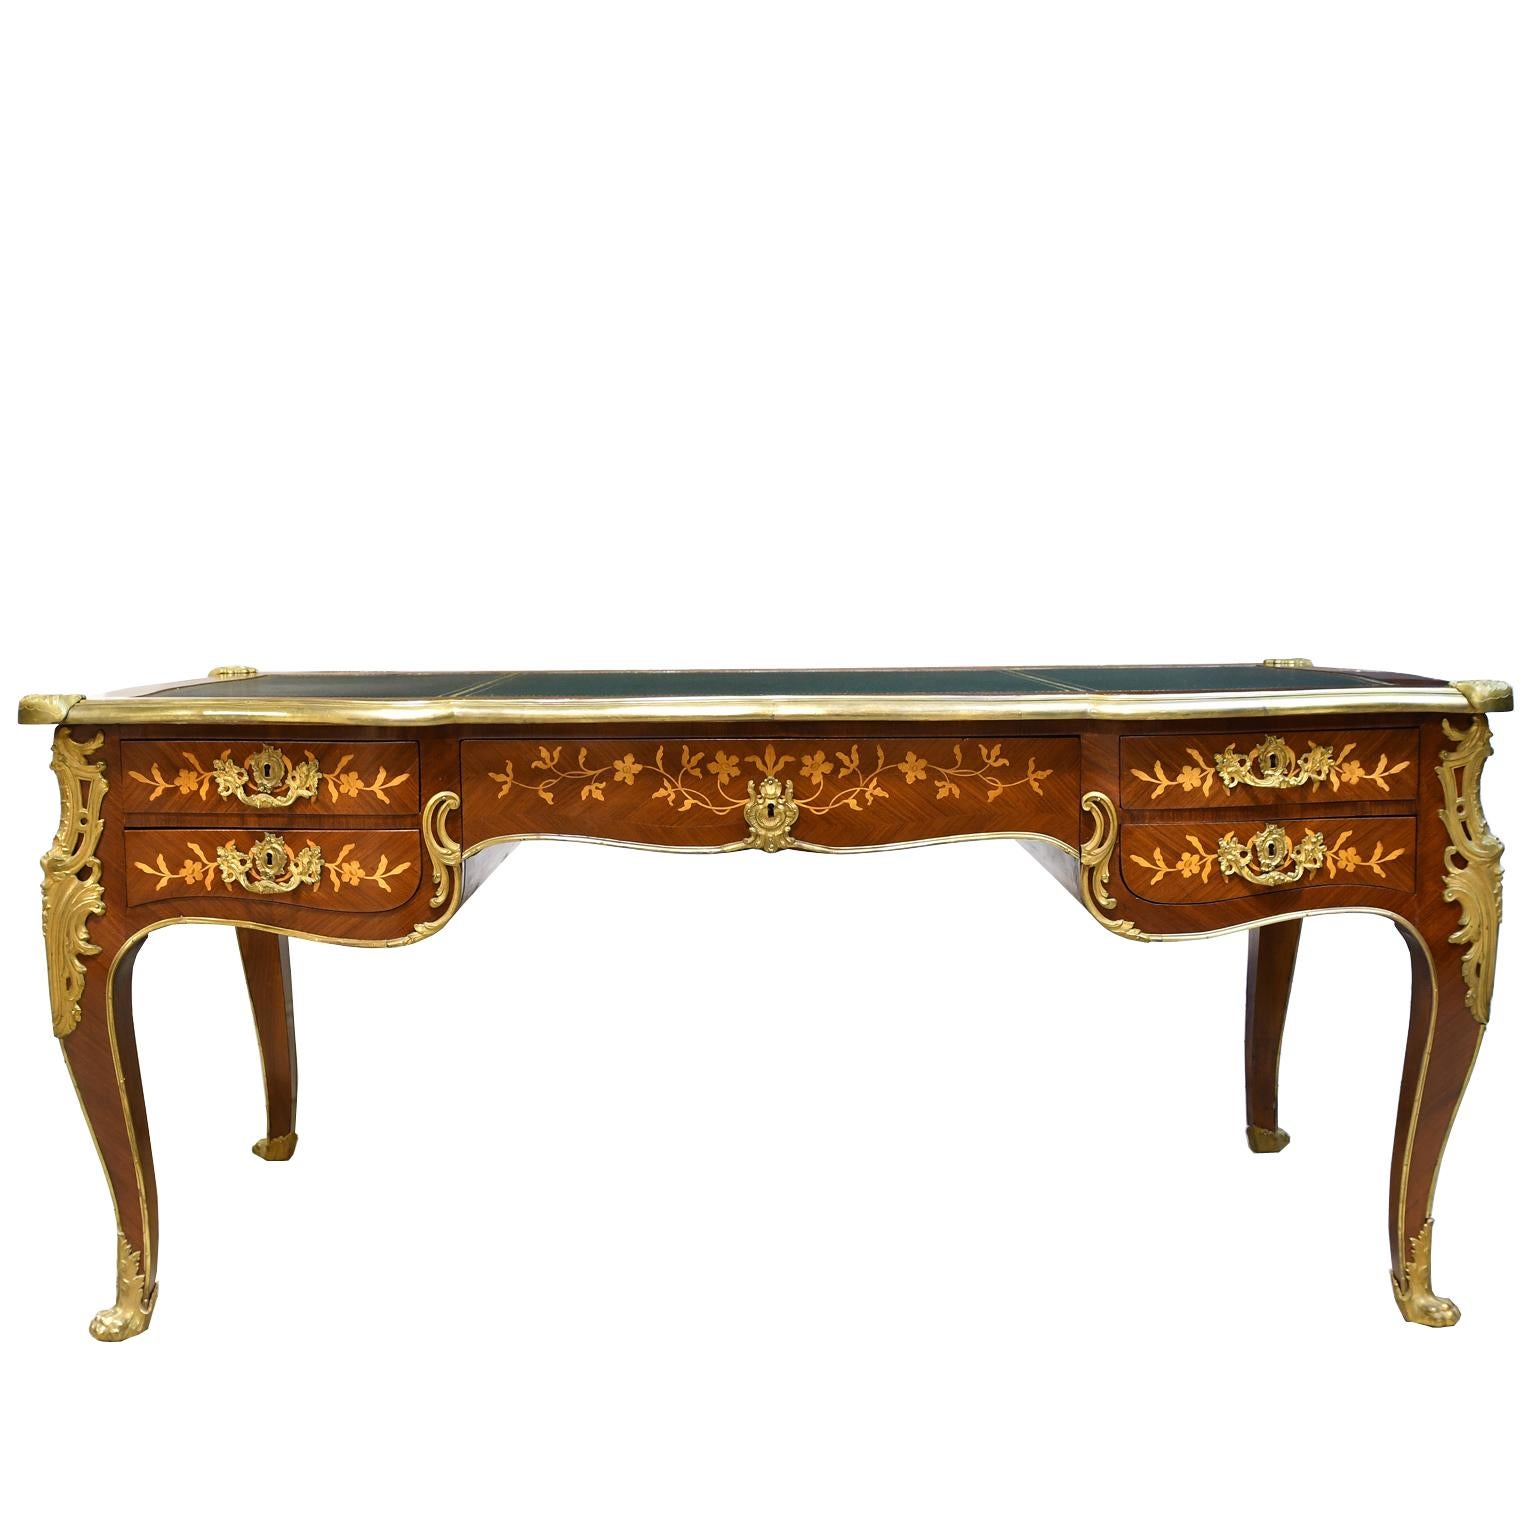 Louis XV French Bureau Plat with Parquetry, Marquetry and Ormolu, circa 1910